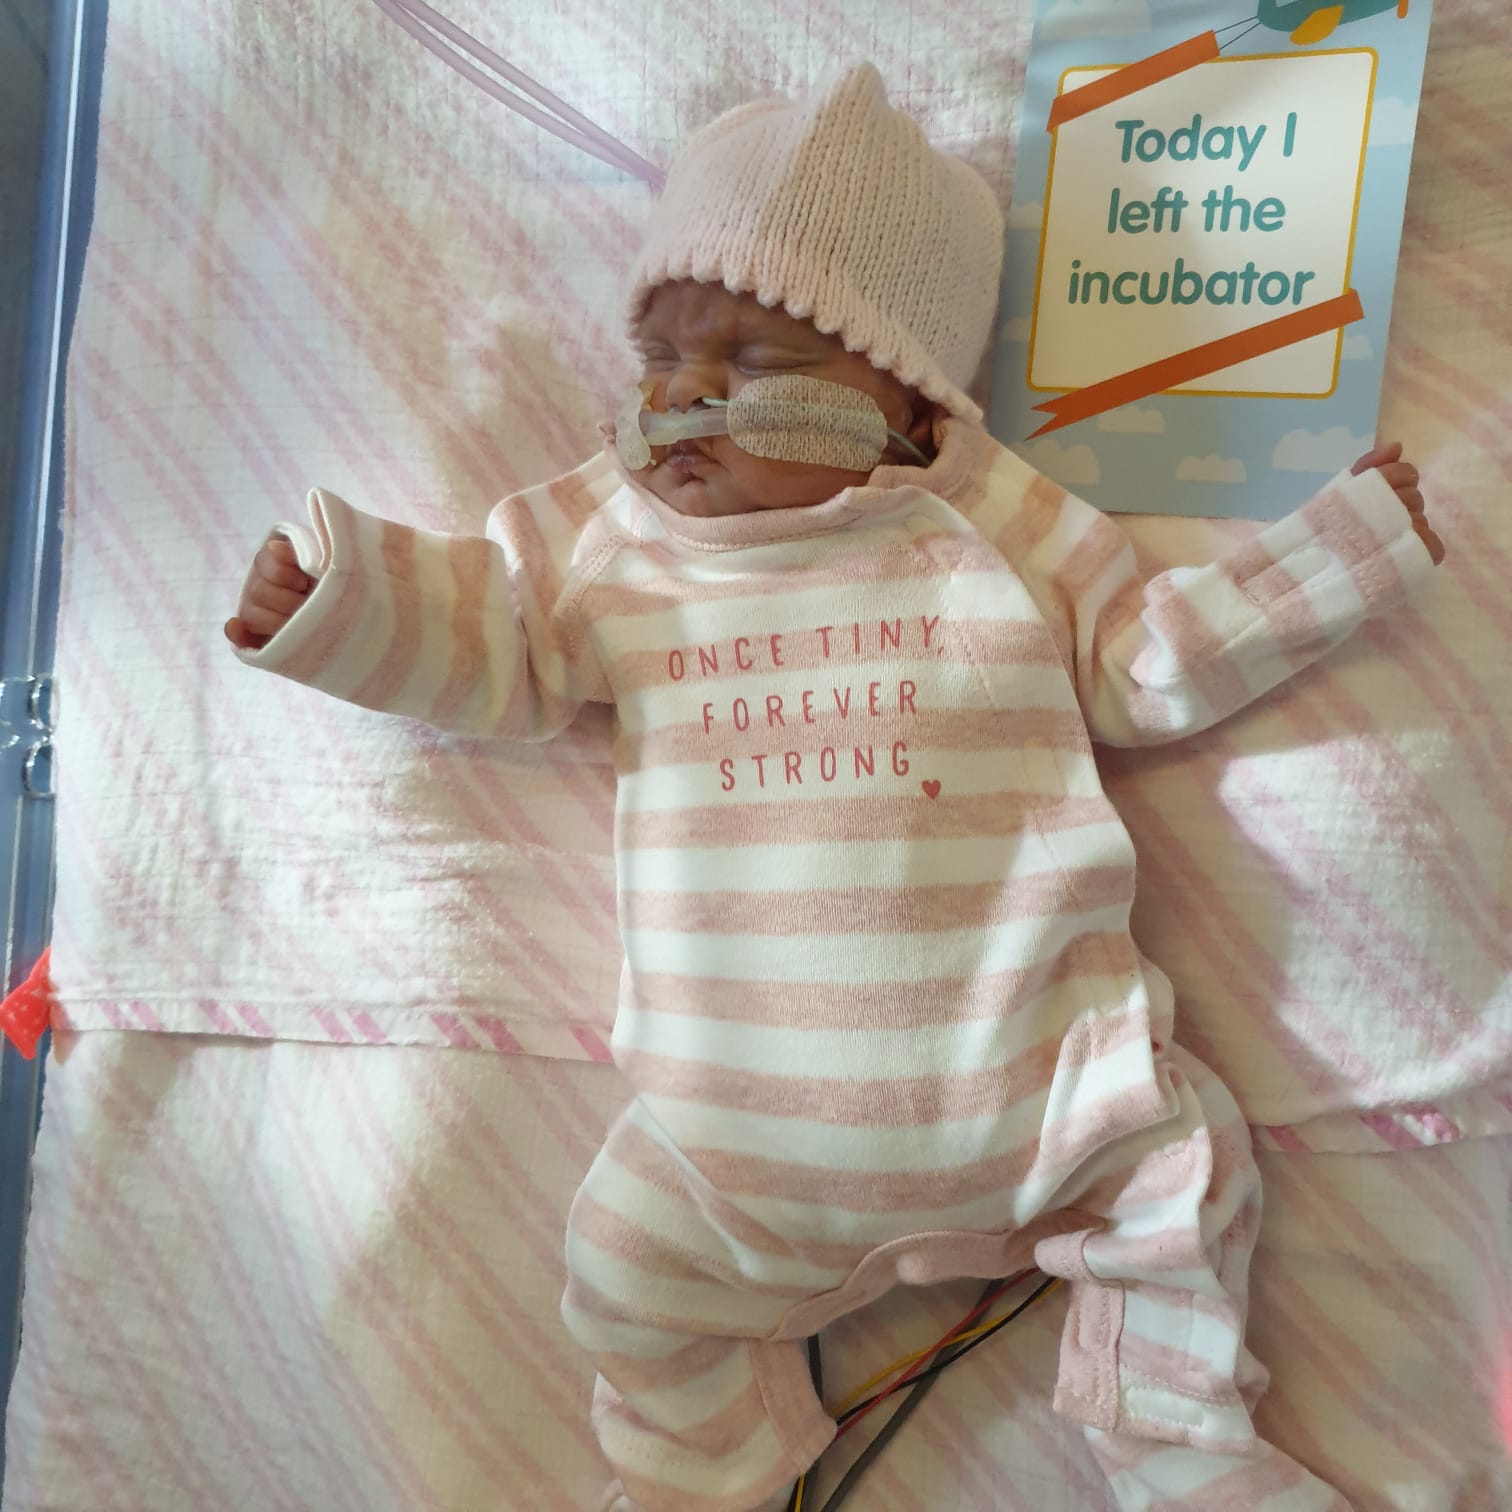 A baby girl lies on her back in a sleep suit reading 'Once tiny, forever strong', next to a sign reading 'Today I left the incubator'